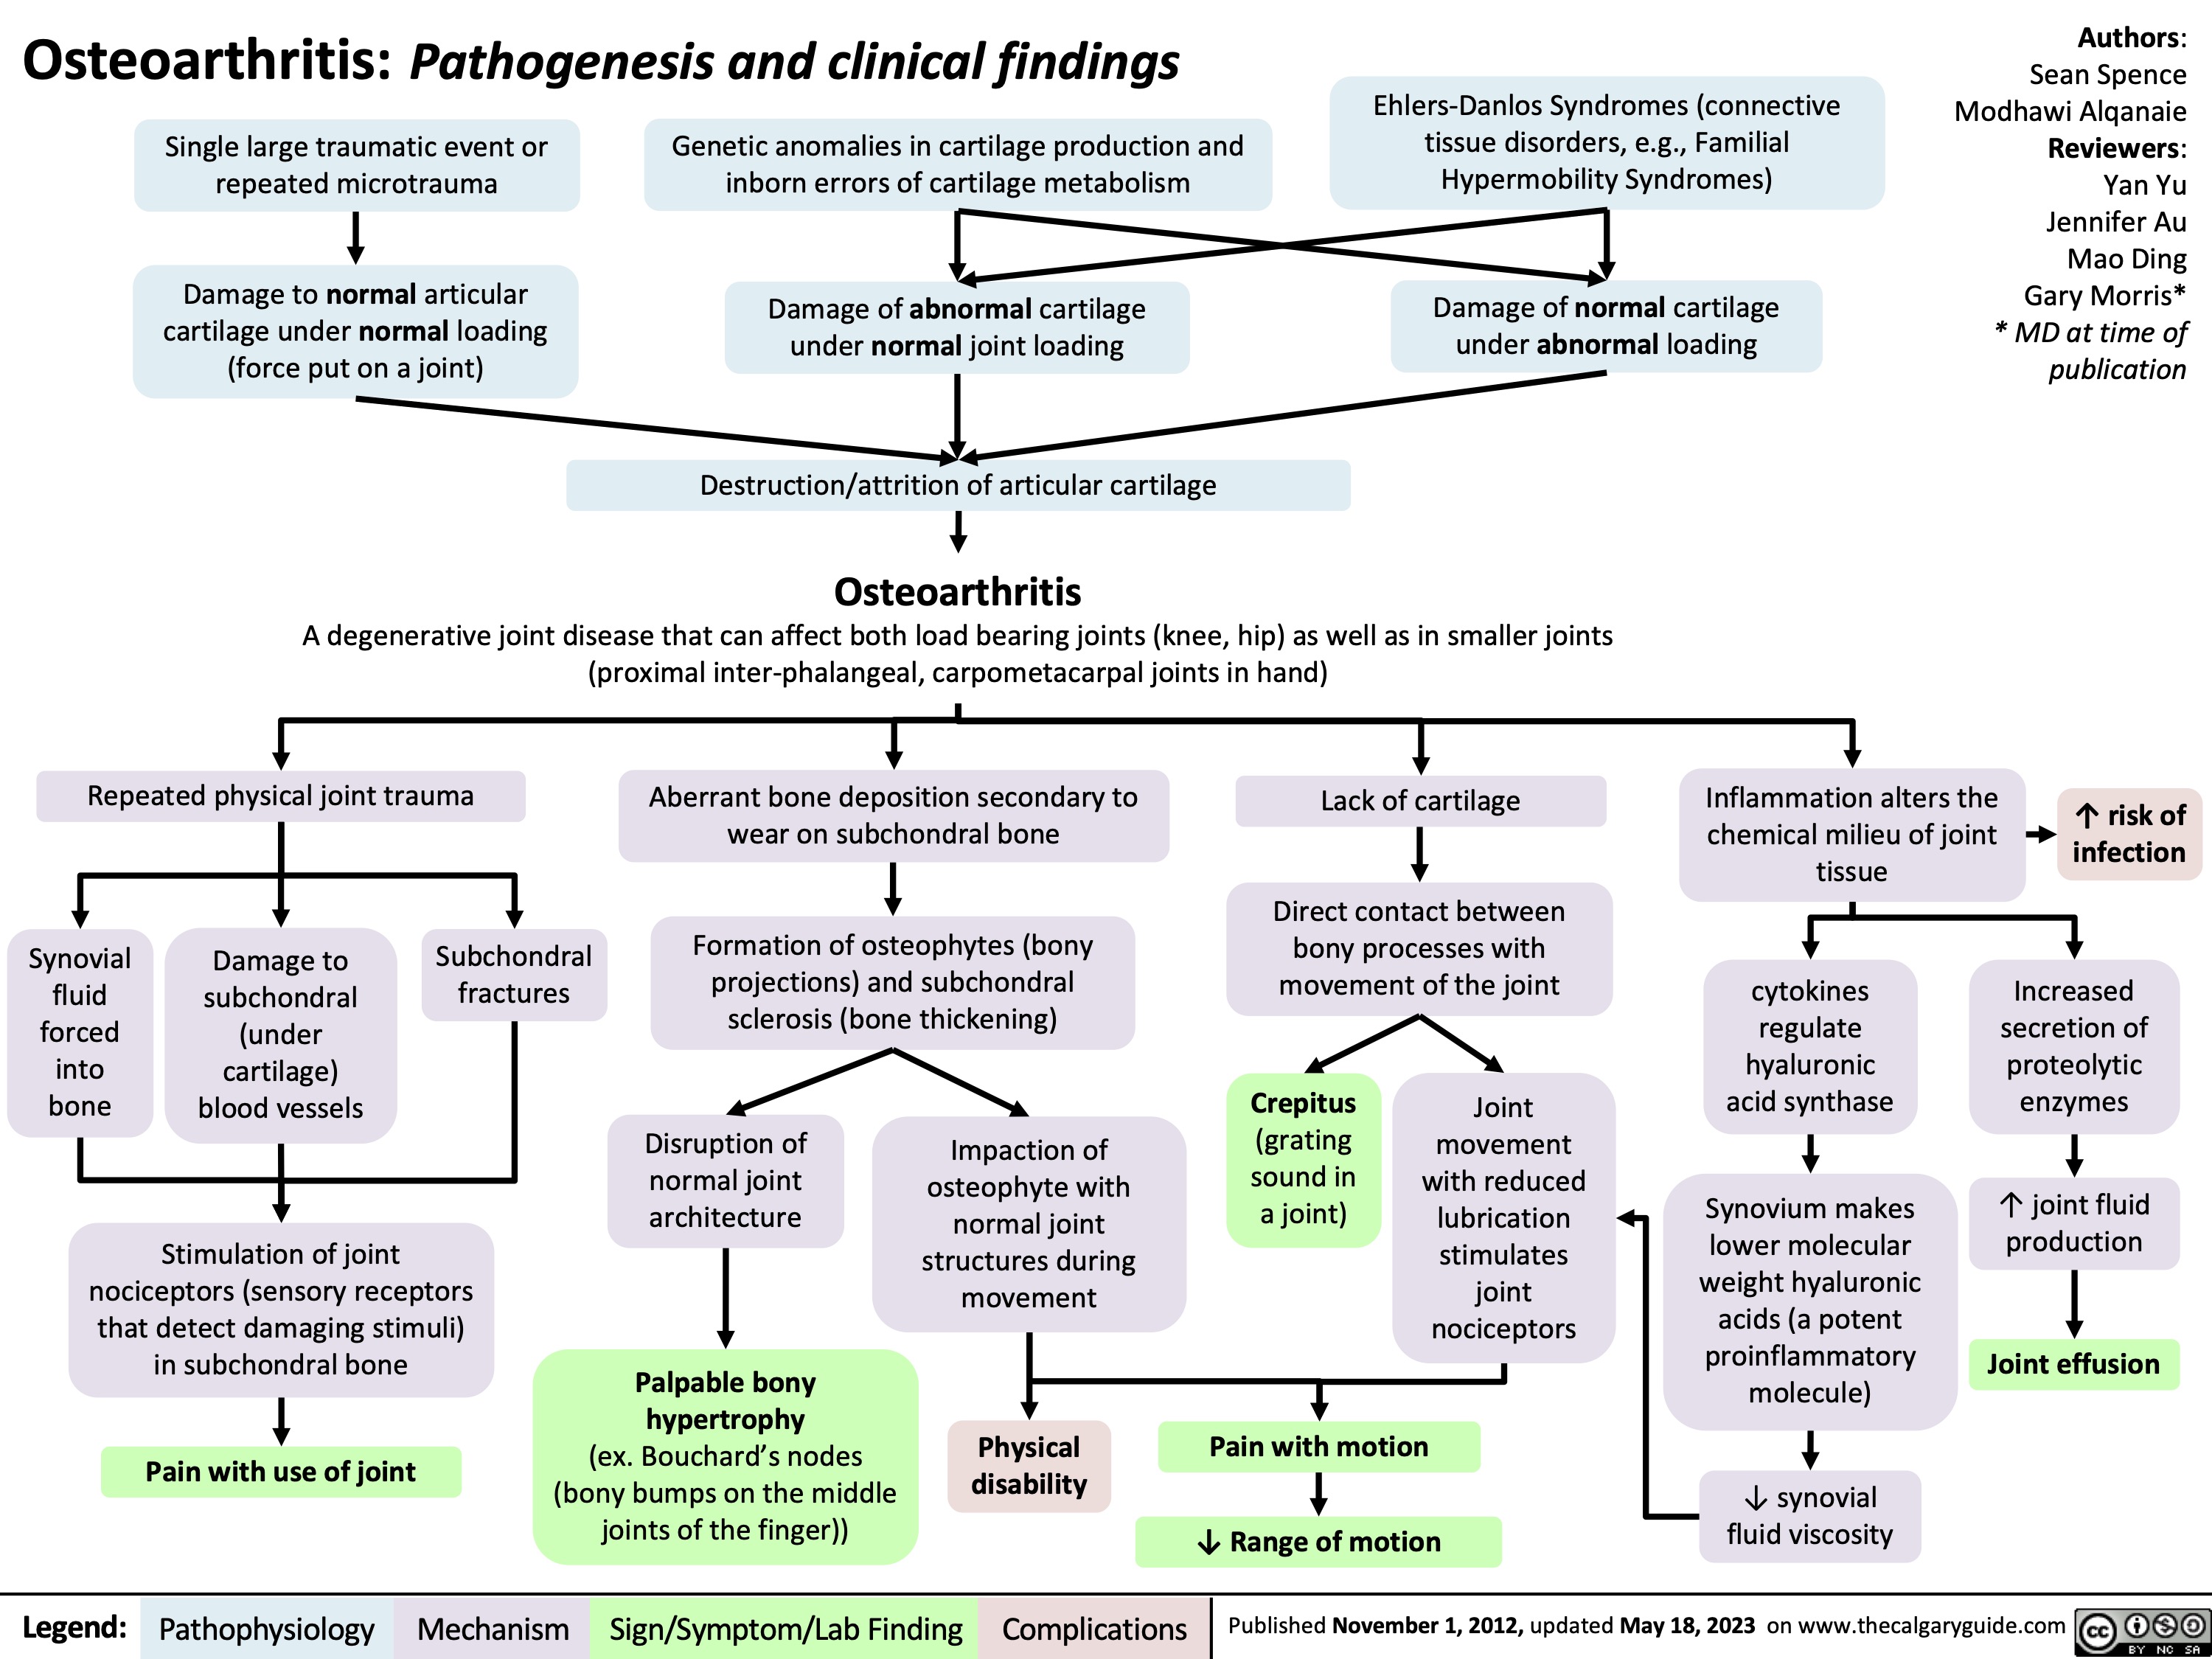 Osteoarthritis: Pathogenesis and clinical findings
Ehlers-Danlos Syndromes (connective tissue disorders, e.g., Familial Hypermobility Syndromes)
Damage of normal cartilage under abnormal loading
Authors: Sean Spence Modhawi Alqanaie Reviewers: Yan Yu Jennifer Au Mao Ding Gary Morris* * MD at time of publication
   Single large traumatic event or repeated microtrauma
Damage to normal articular cartilage under normal loading (force put on a joint)
Genetic anomalies in cartilage production and inborn errors of cartilage metabolism
Damage of abnormal cartilage under normal joint loading
Destruction/attrition of articular cartilage
Osteoarthritis
       A degenerative joint disease that can affect both load bearing joints (knee, hip) as well as in smaller joints (proximal inter-phalangeal, carpometacarpal joints in hand)
       Repeated physical joint trauma
Aberrant bone deposition secondary to wear on subchondral bone
Formation of osteophytes (bony projections) and subchondral sclerosis (bone thickening)
Lack of cartilage
Direct contact between bony processes with movement of the joint
Inflammation alters the chemical milieu of joint tissue
        Synovial fluid forced into bone
Damage to subchondral (under cartilage) blood vessels
Subchondral fractures
cytokines regulate hyaluronic acid synthase
Synovium makes lower molecular weight hyaluronic acids (a potent proinflammatory molecule)
↓ synovial fluid viscosity
↑ risk of infection
Increased secretion of proteolytic enzymes
↑ joint fluid production
Joint effusion
          Disruption of normal joint architecture
Palpable bony hypertrophy
(ex. Bouchard’s nodes (bony bumps on the middle joints of the finger))
Impaction of osteophyte with normal joint structures during movement
Physical disability
Crepitus
(grating sound in a joint)
Joint movement with reduced lubrication stimulates joint nociceptors
    Stimulation of joint nociceptors (sensory receptors that detect damaging stimuli) in subchondral bone
Pain with use of joint
Pain with motion
↓ Range of motion
           Legend:
 Pathophysiology
 Mechanism
Sign/Symptom/Lab Finding
 Complications
 Published November 1, 2012, updated May 18, 2023 on www.thecalgaryguide.com
  